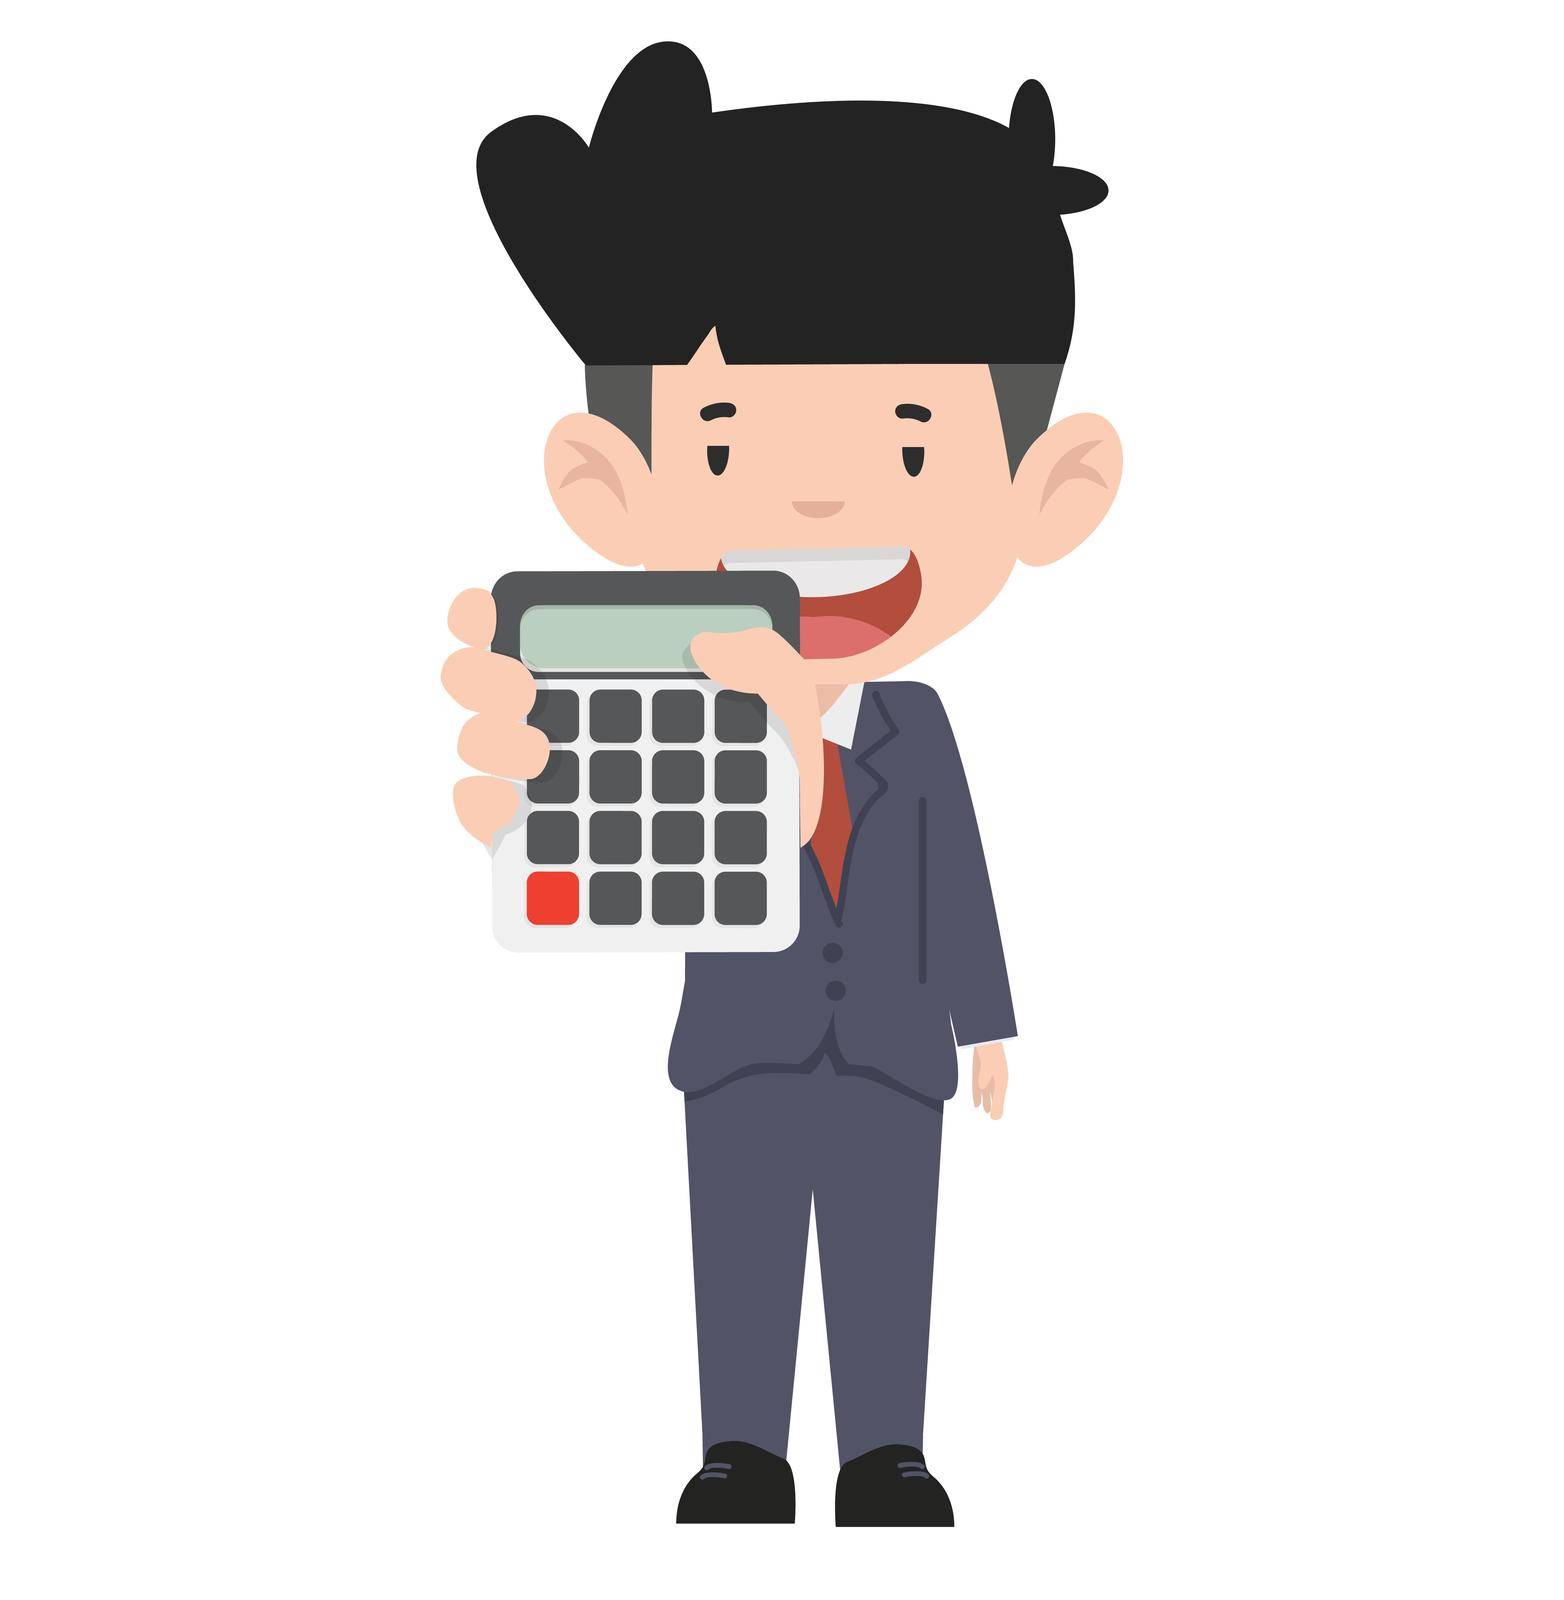 Cute Business man with calculator vector in office style smart suit cartoon